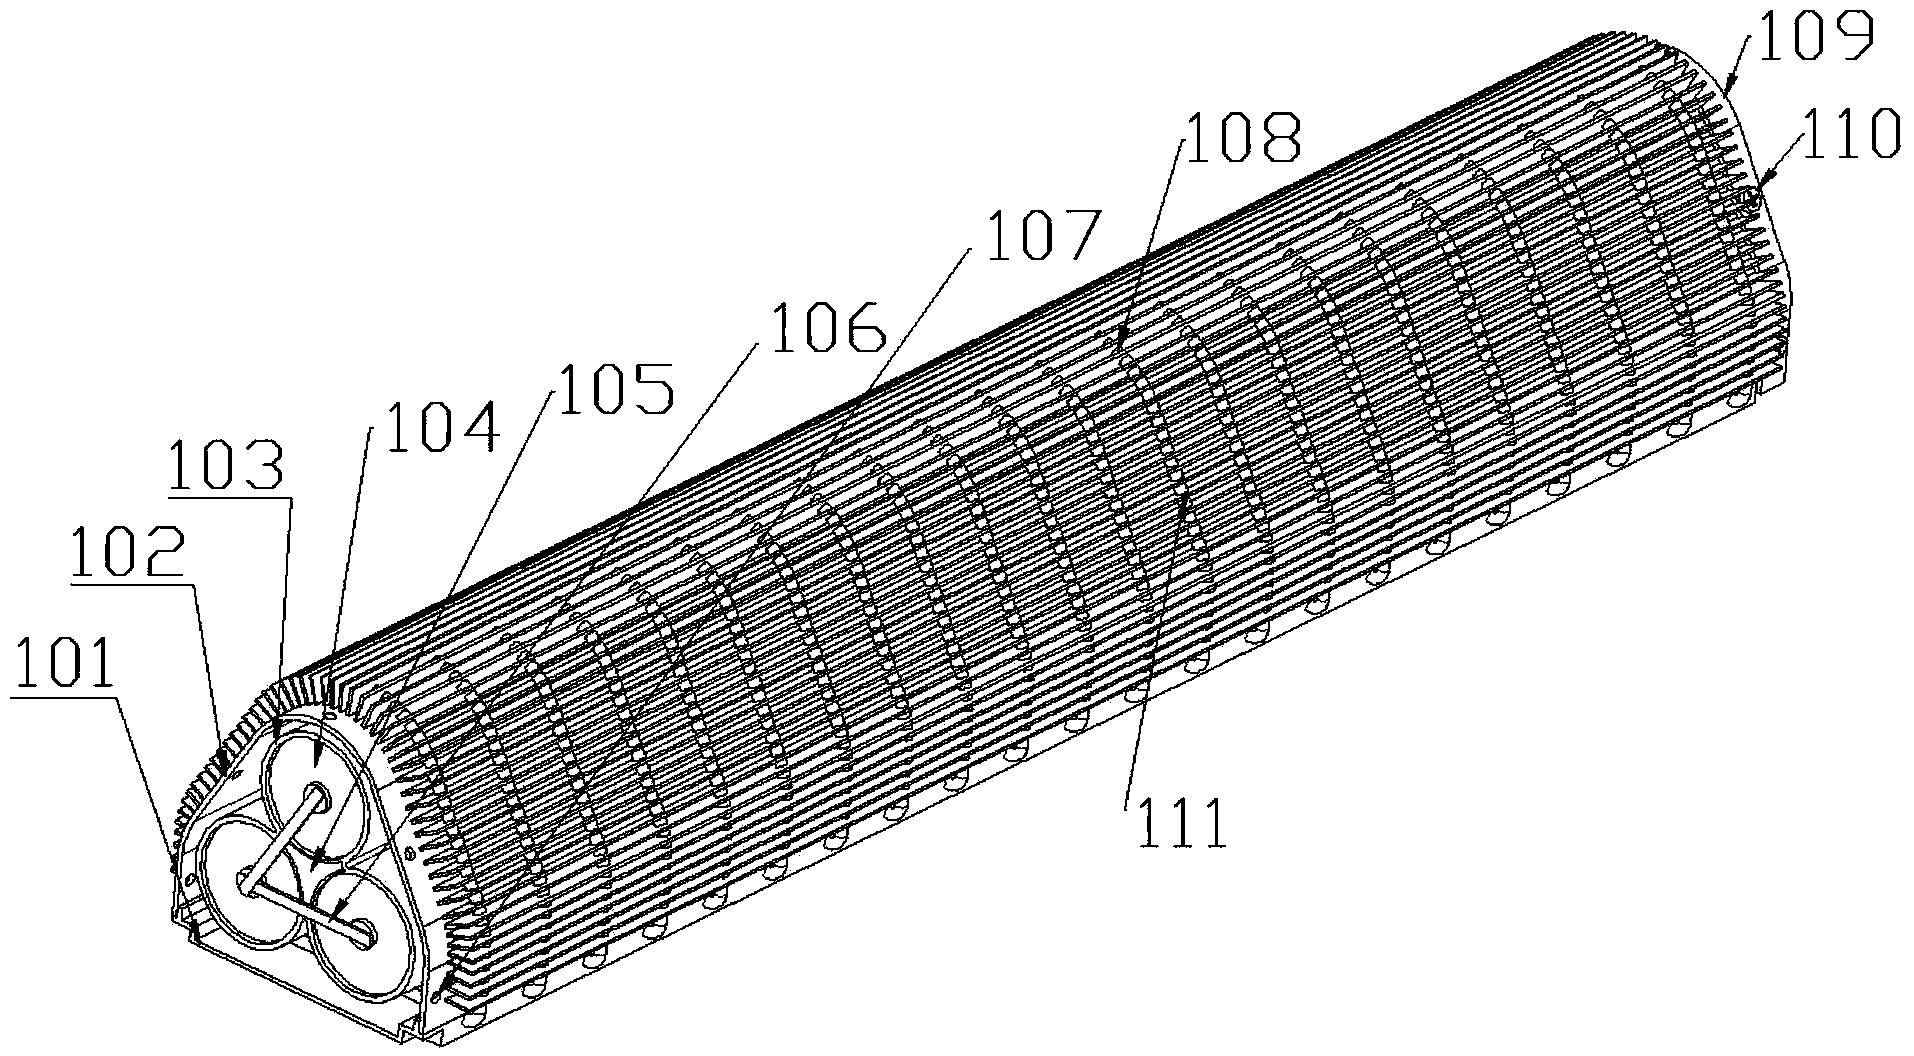 Power battery module based on air, hot pipe and phase-change material coupled cooling